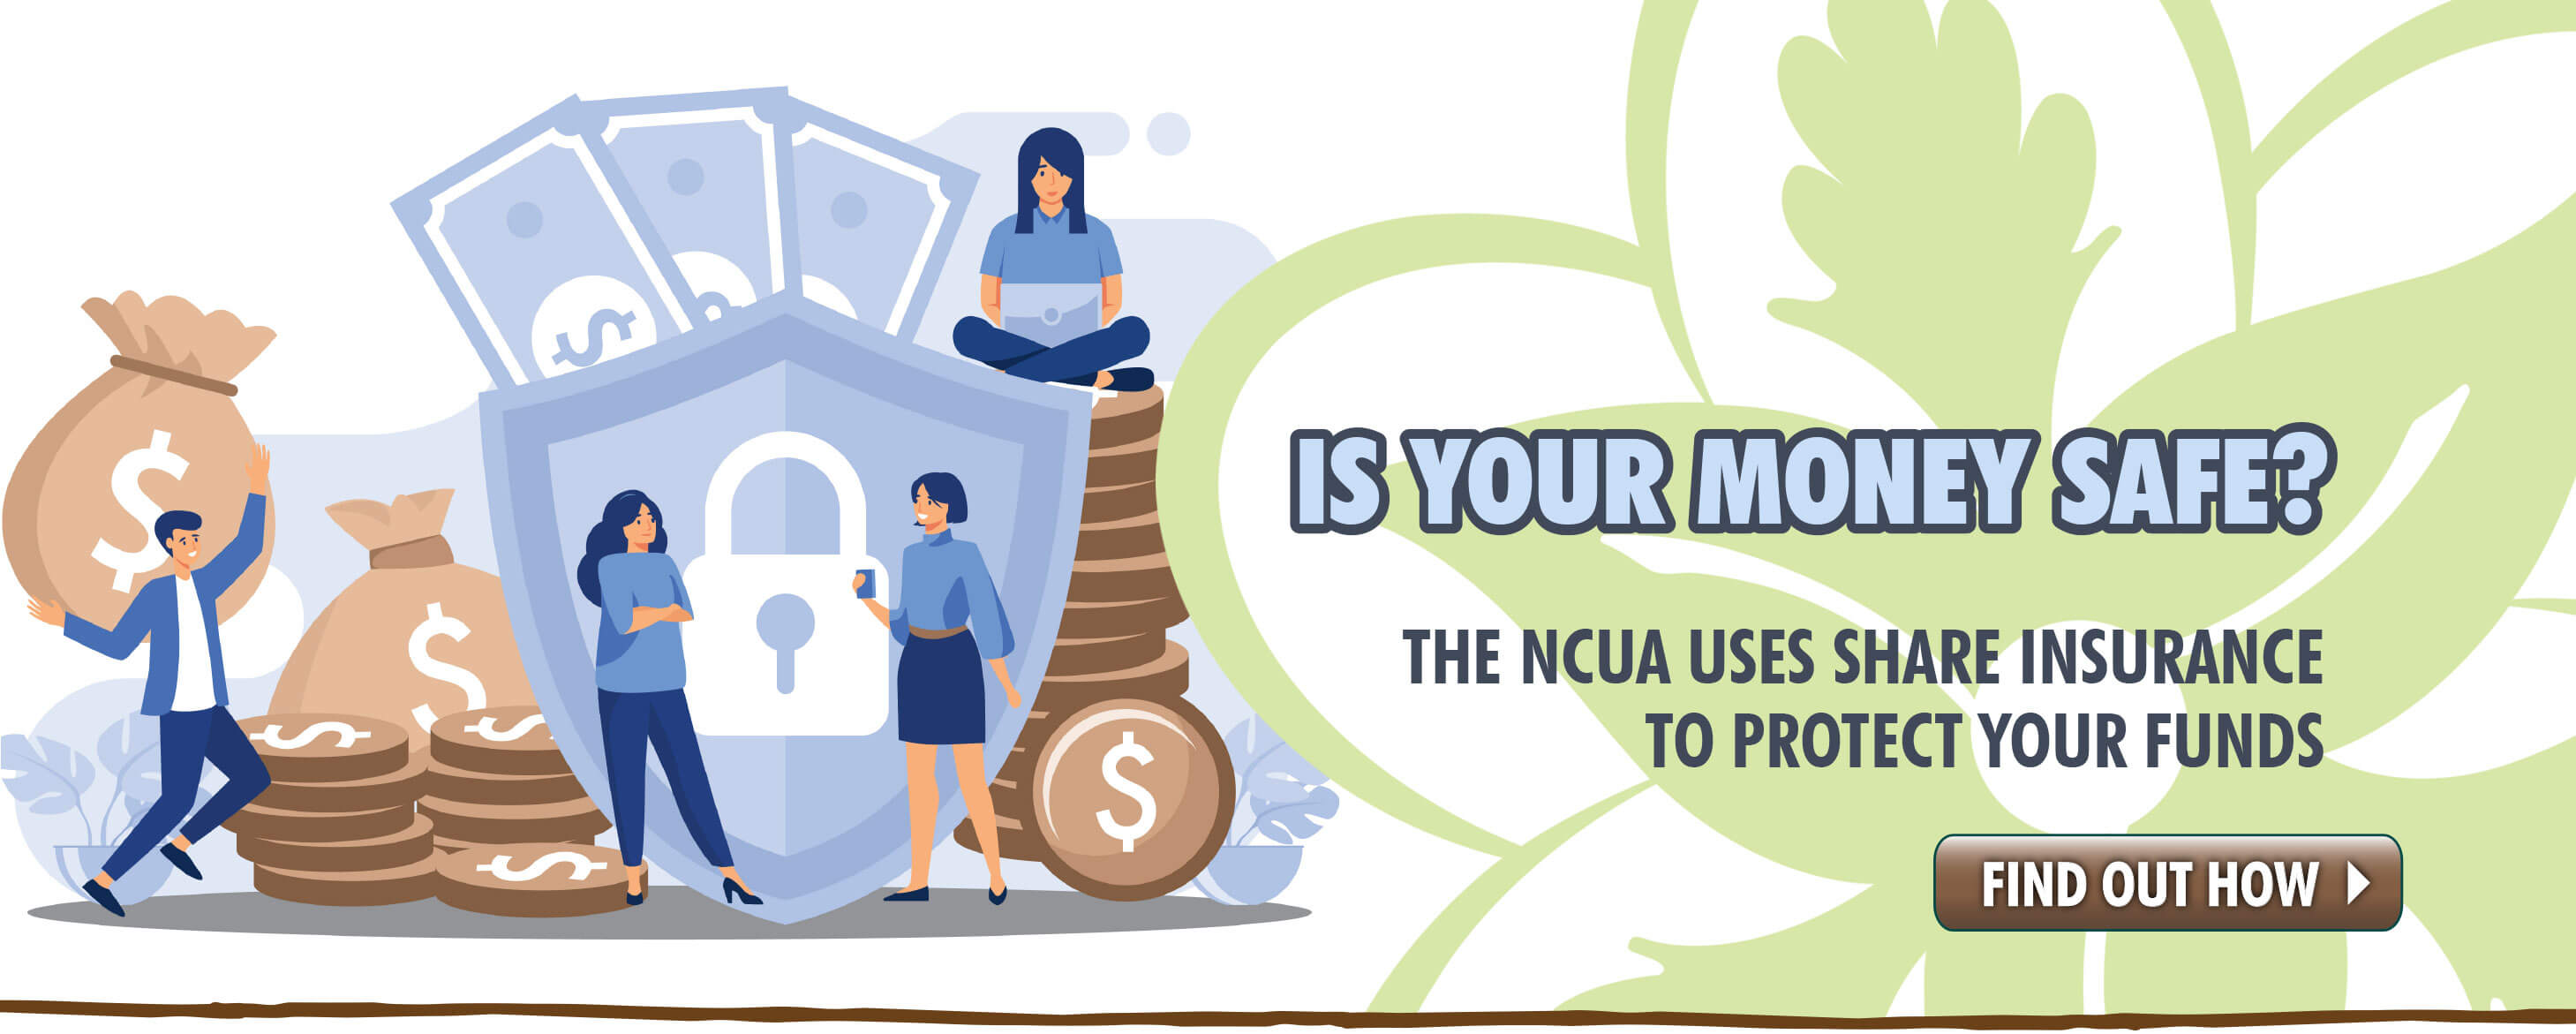 Find out more info on how the NCUA protects your funds through Share Insurance